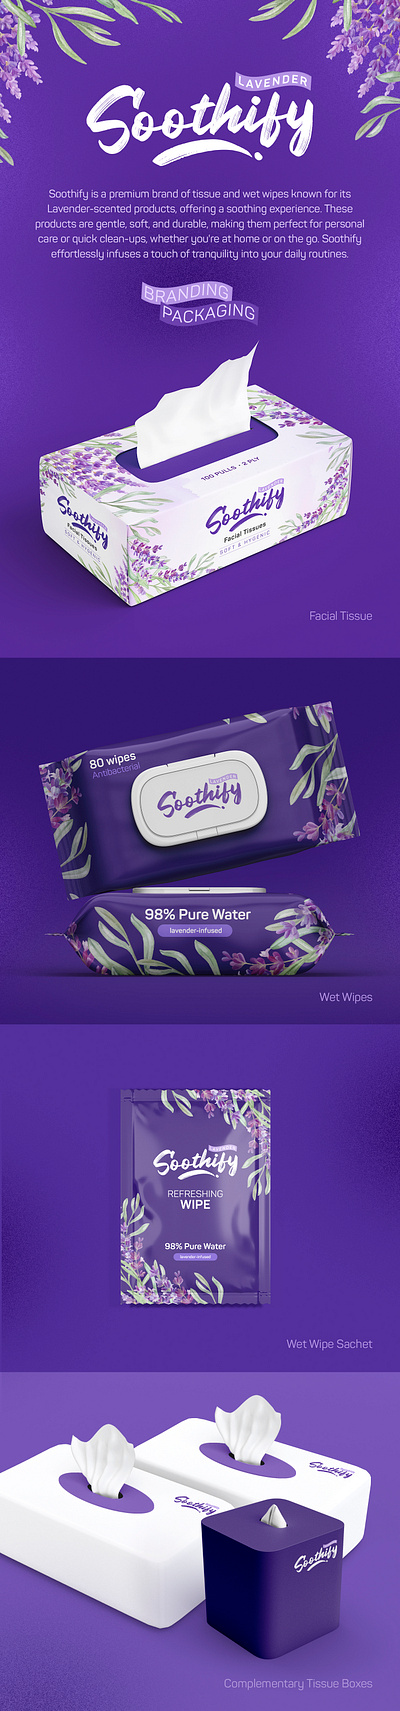 Soothify - Tissues & Wet Wipes - Branding & Packaging branding facial tissues health medical packaging tissue box wet wipes